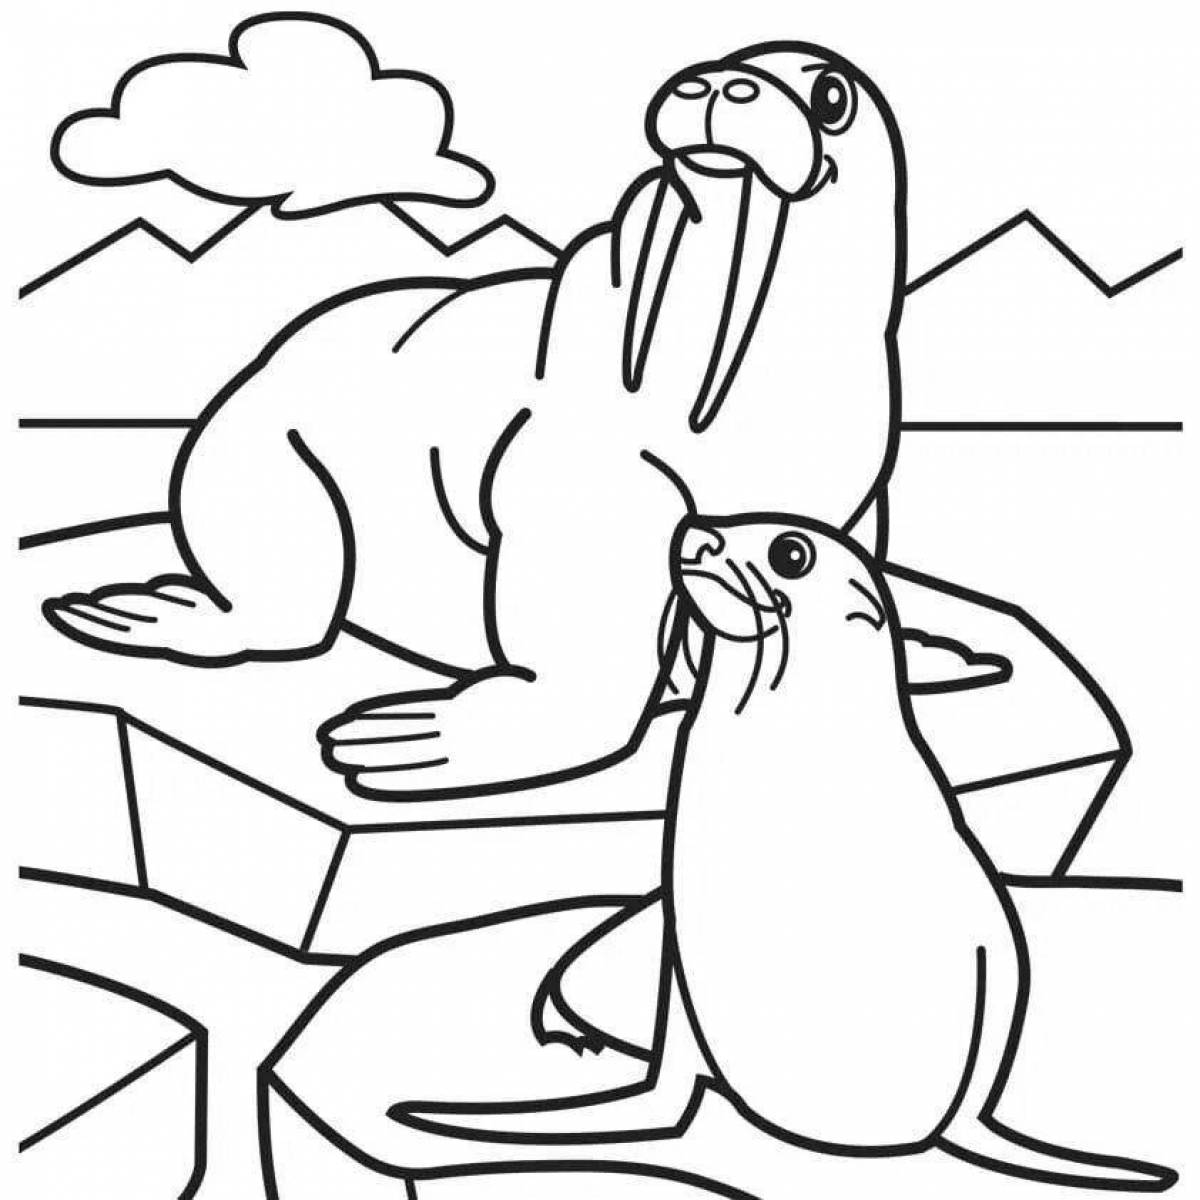 Perfect arctic animals coloring pages for kids